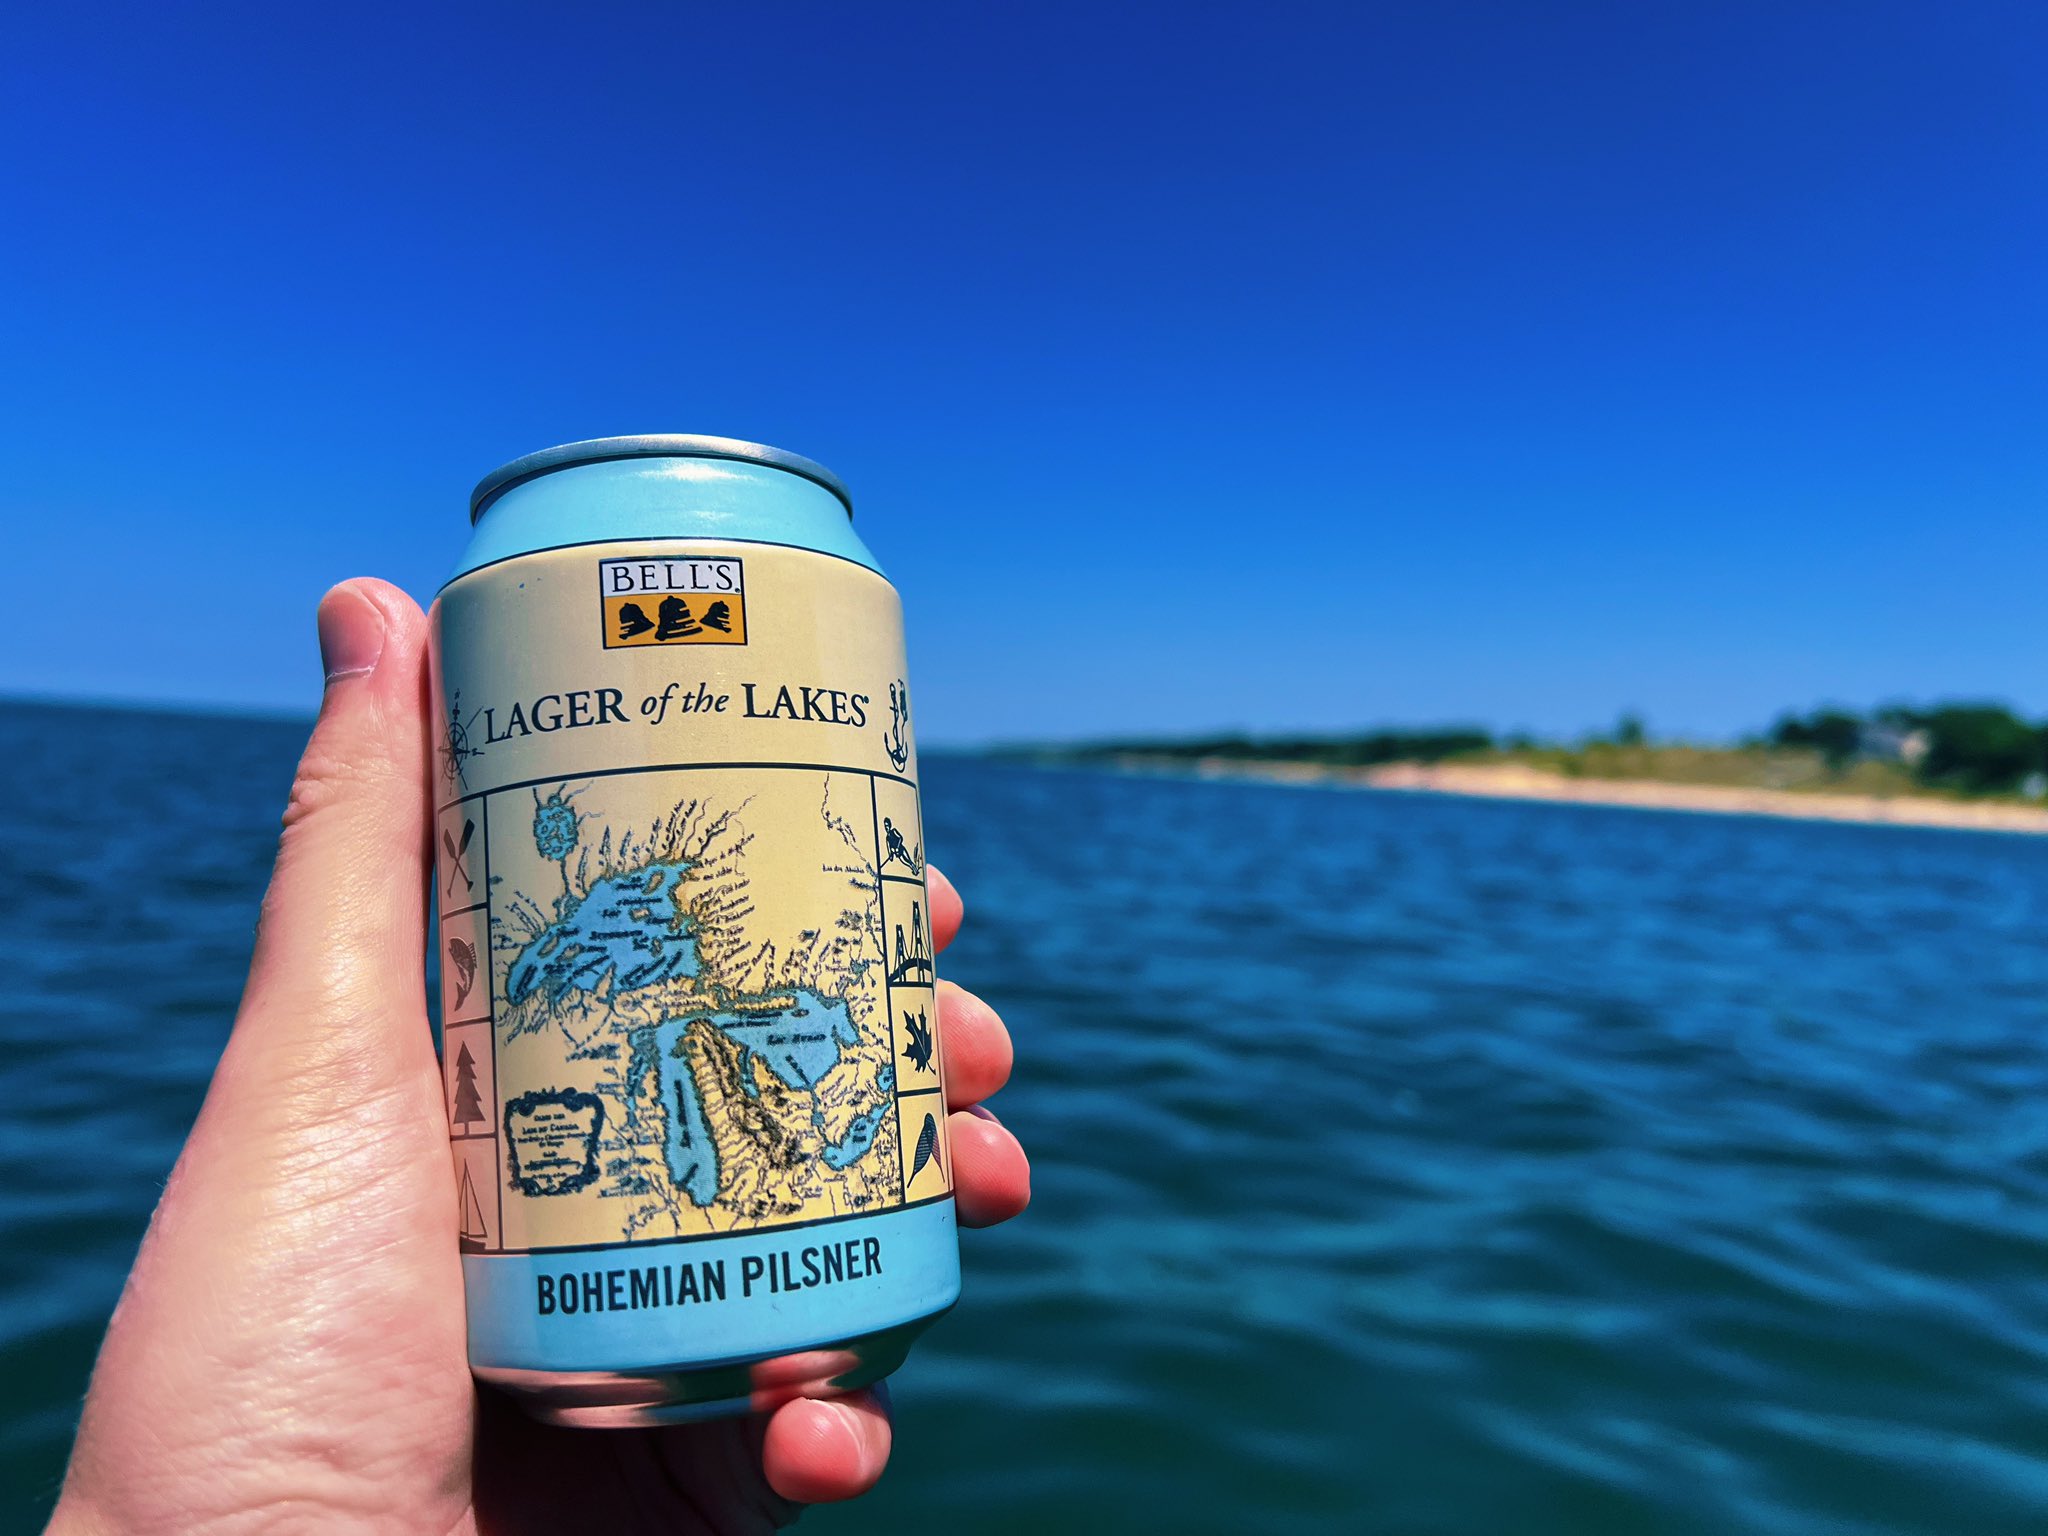 Lager of the Lakes - Bell's Brewery